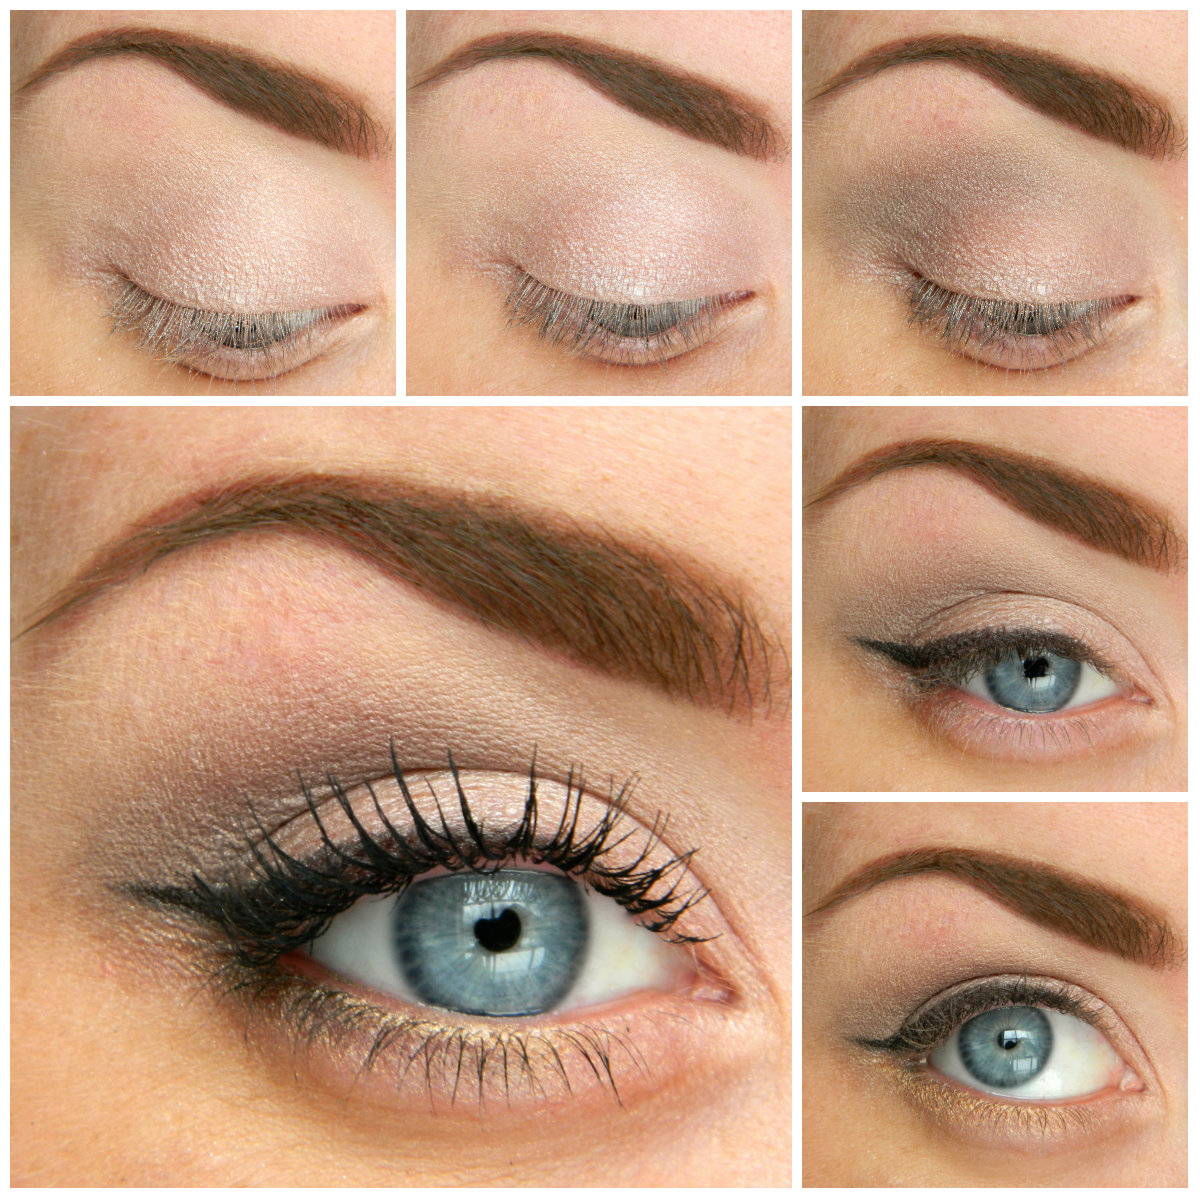 Pretty Eye Makeup For Blue Eyes 5 Ways To Make Blue Eyes Pop With Proper Eye Makeup Her Style Code